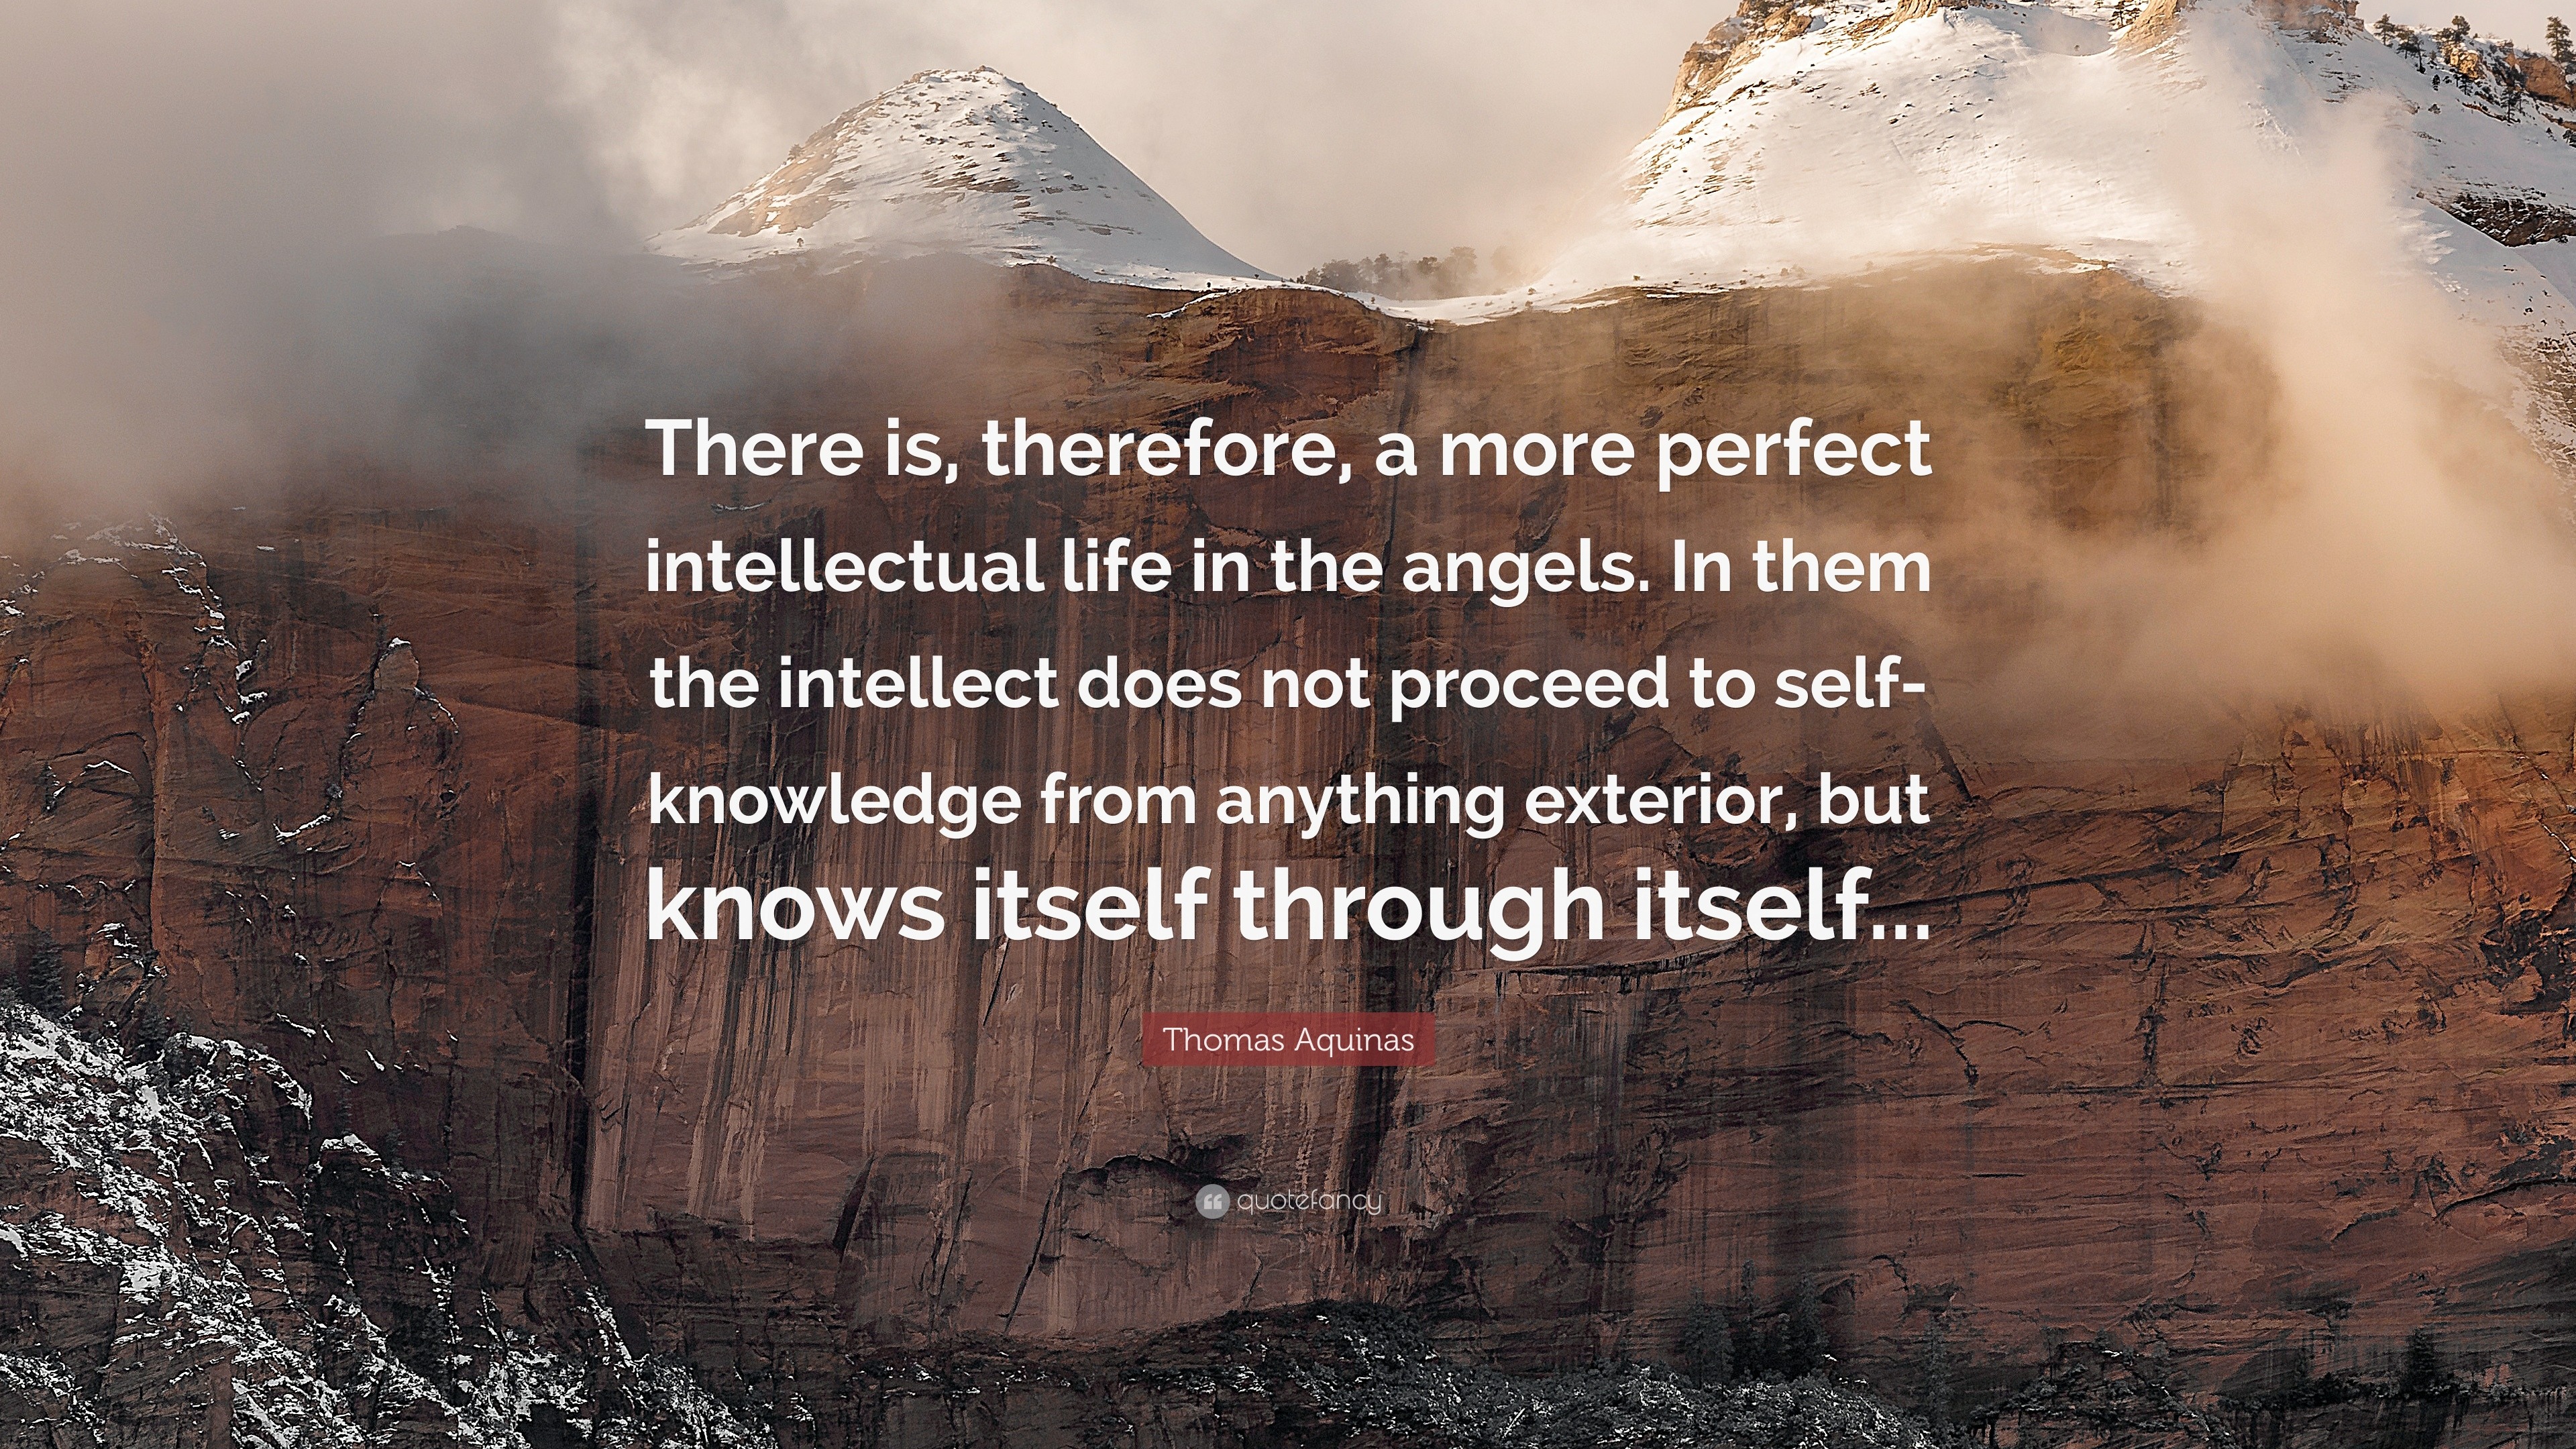 Thomas Aquinas Quote “There is therefore a more perfect intellectual life in